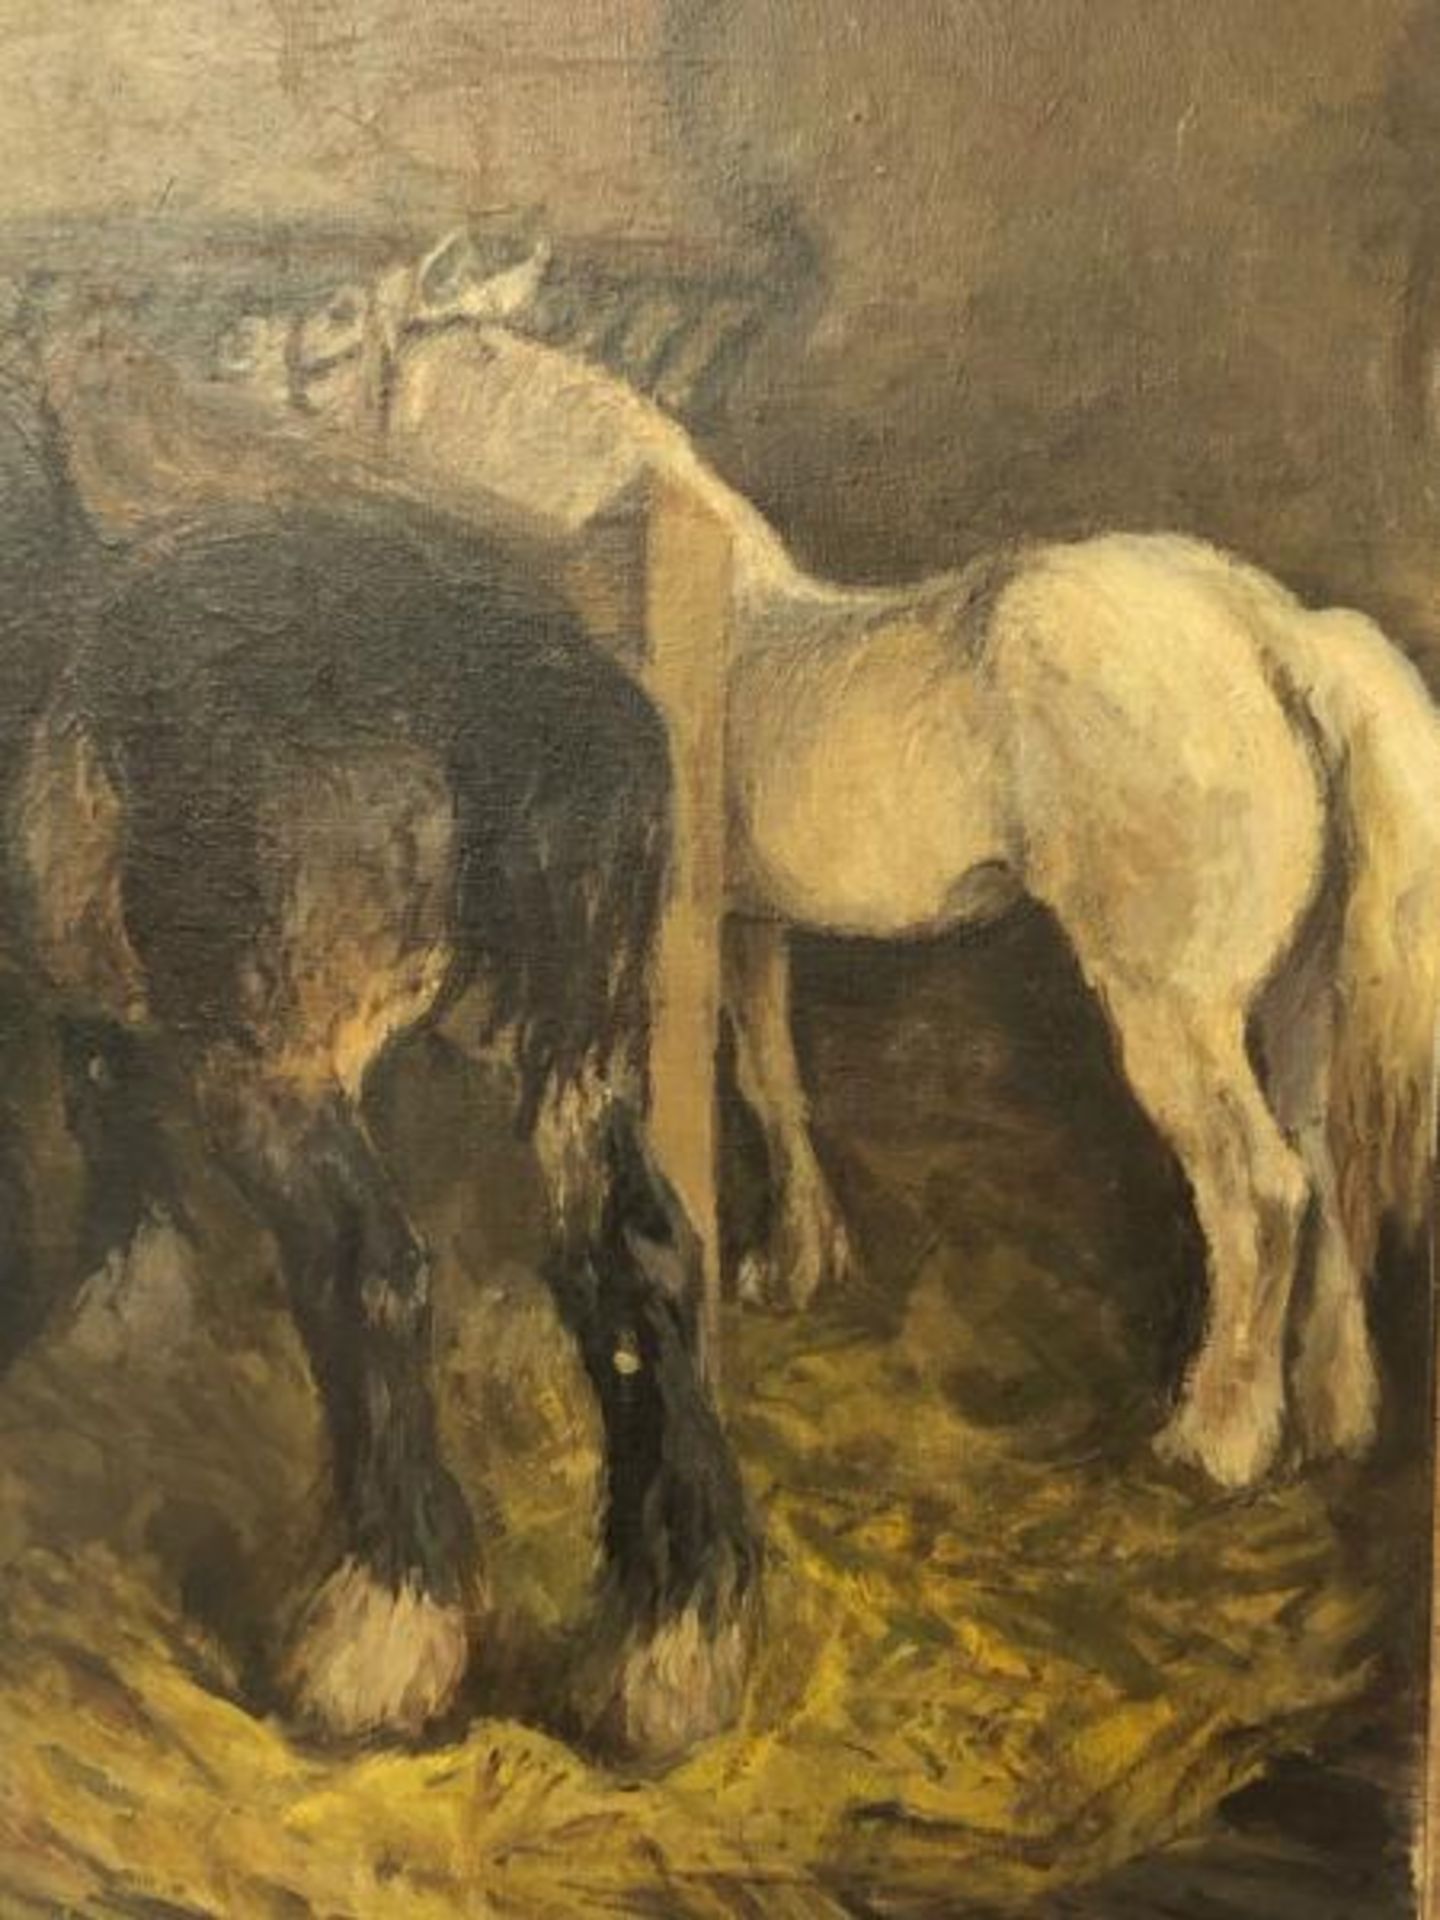 Helen Collins (1921 - 1990) " The Stables at Pursers Farm" possibly 2nd study , oil on canvas, - Image 3 of 7